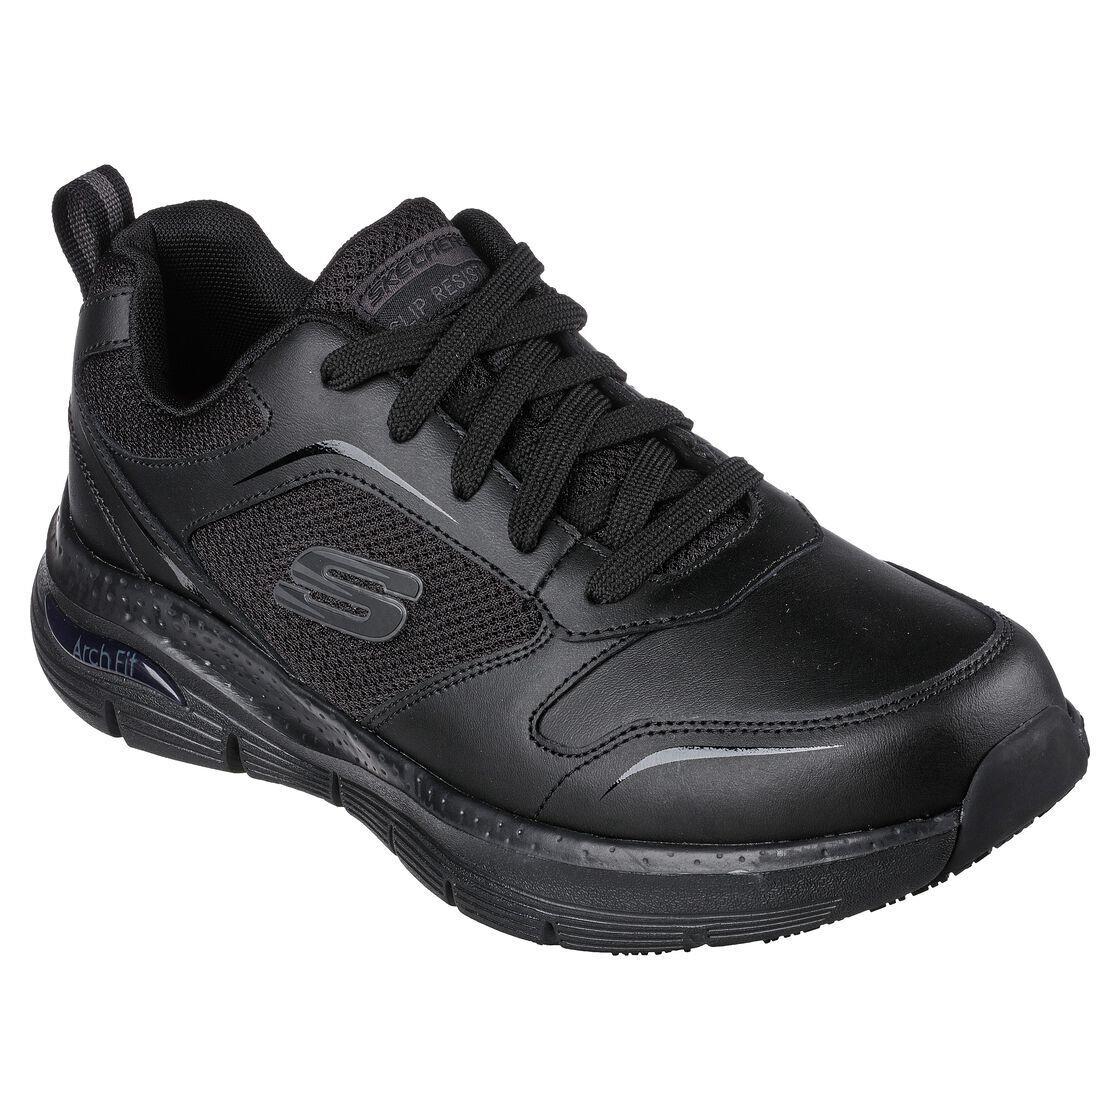 Skechers Work Shoes Men Black Arch Fit Slip Resistant Leather Air Cooled 200073